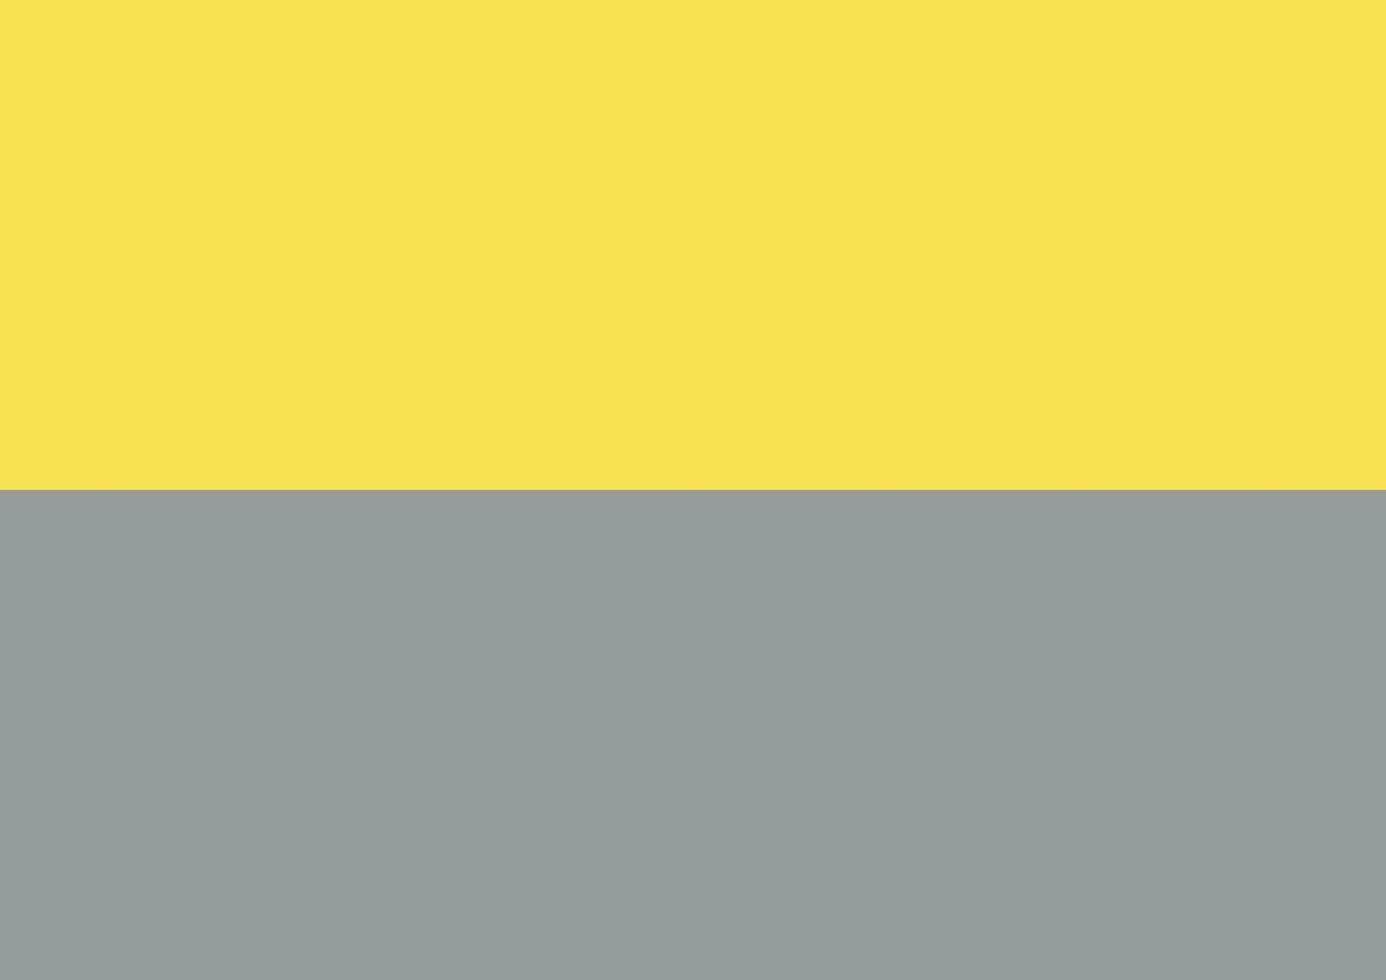 Contrast pastel gray and yellow trendy background vector